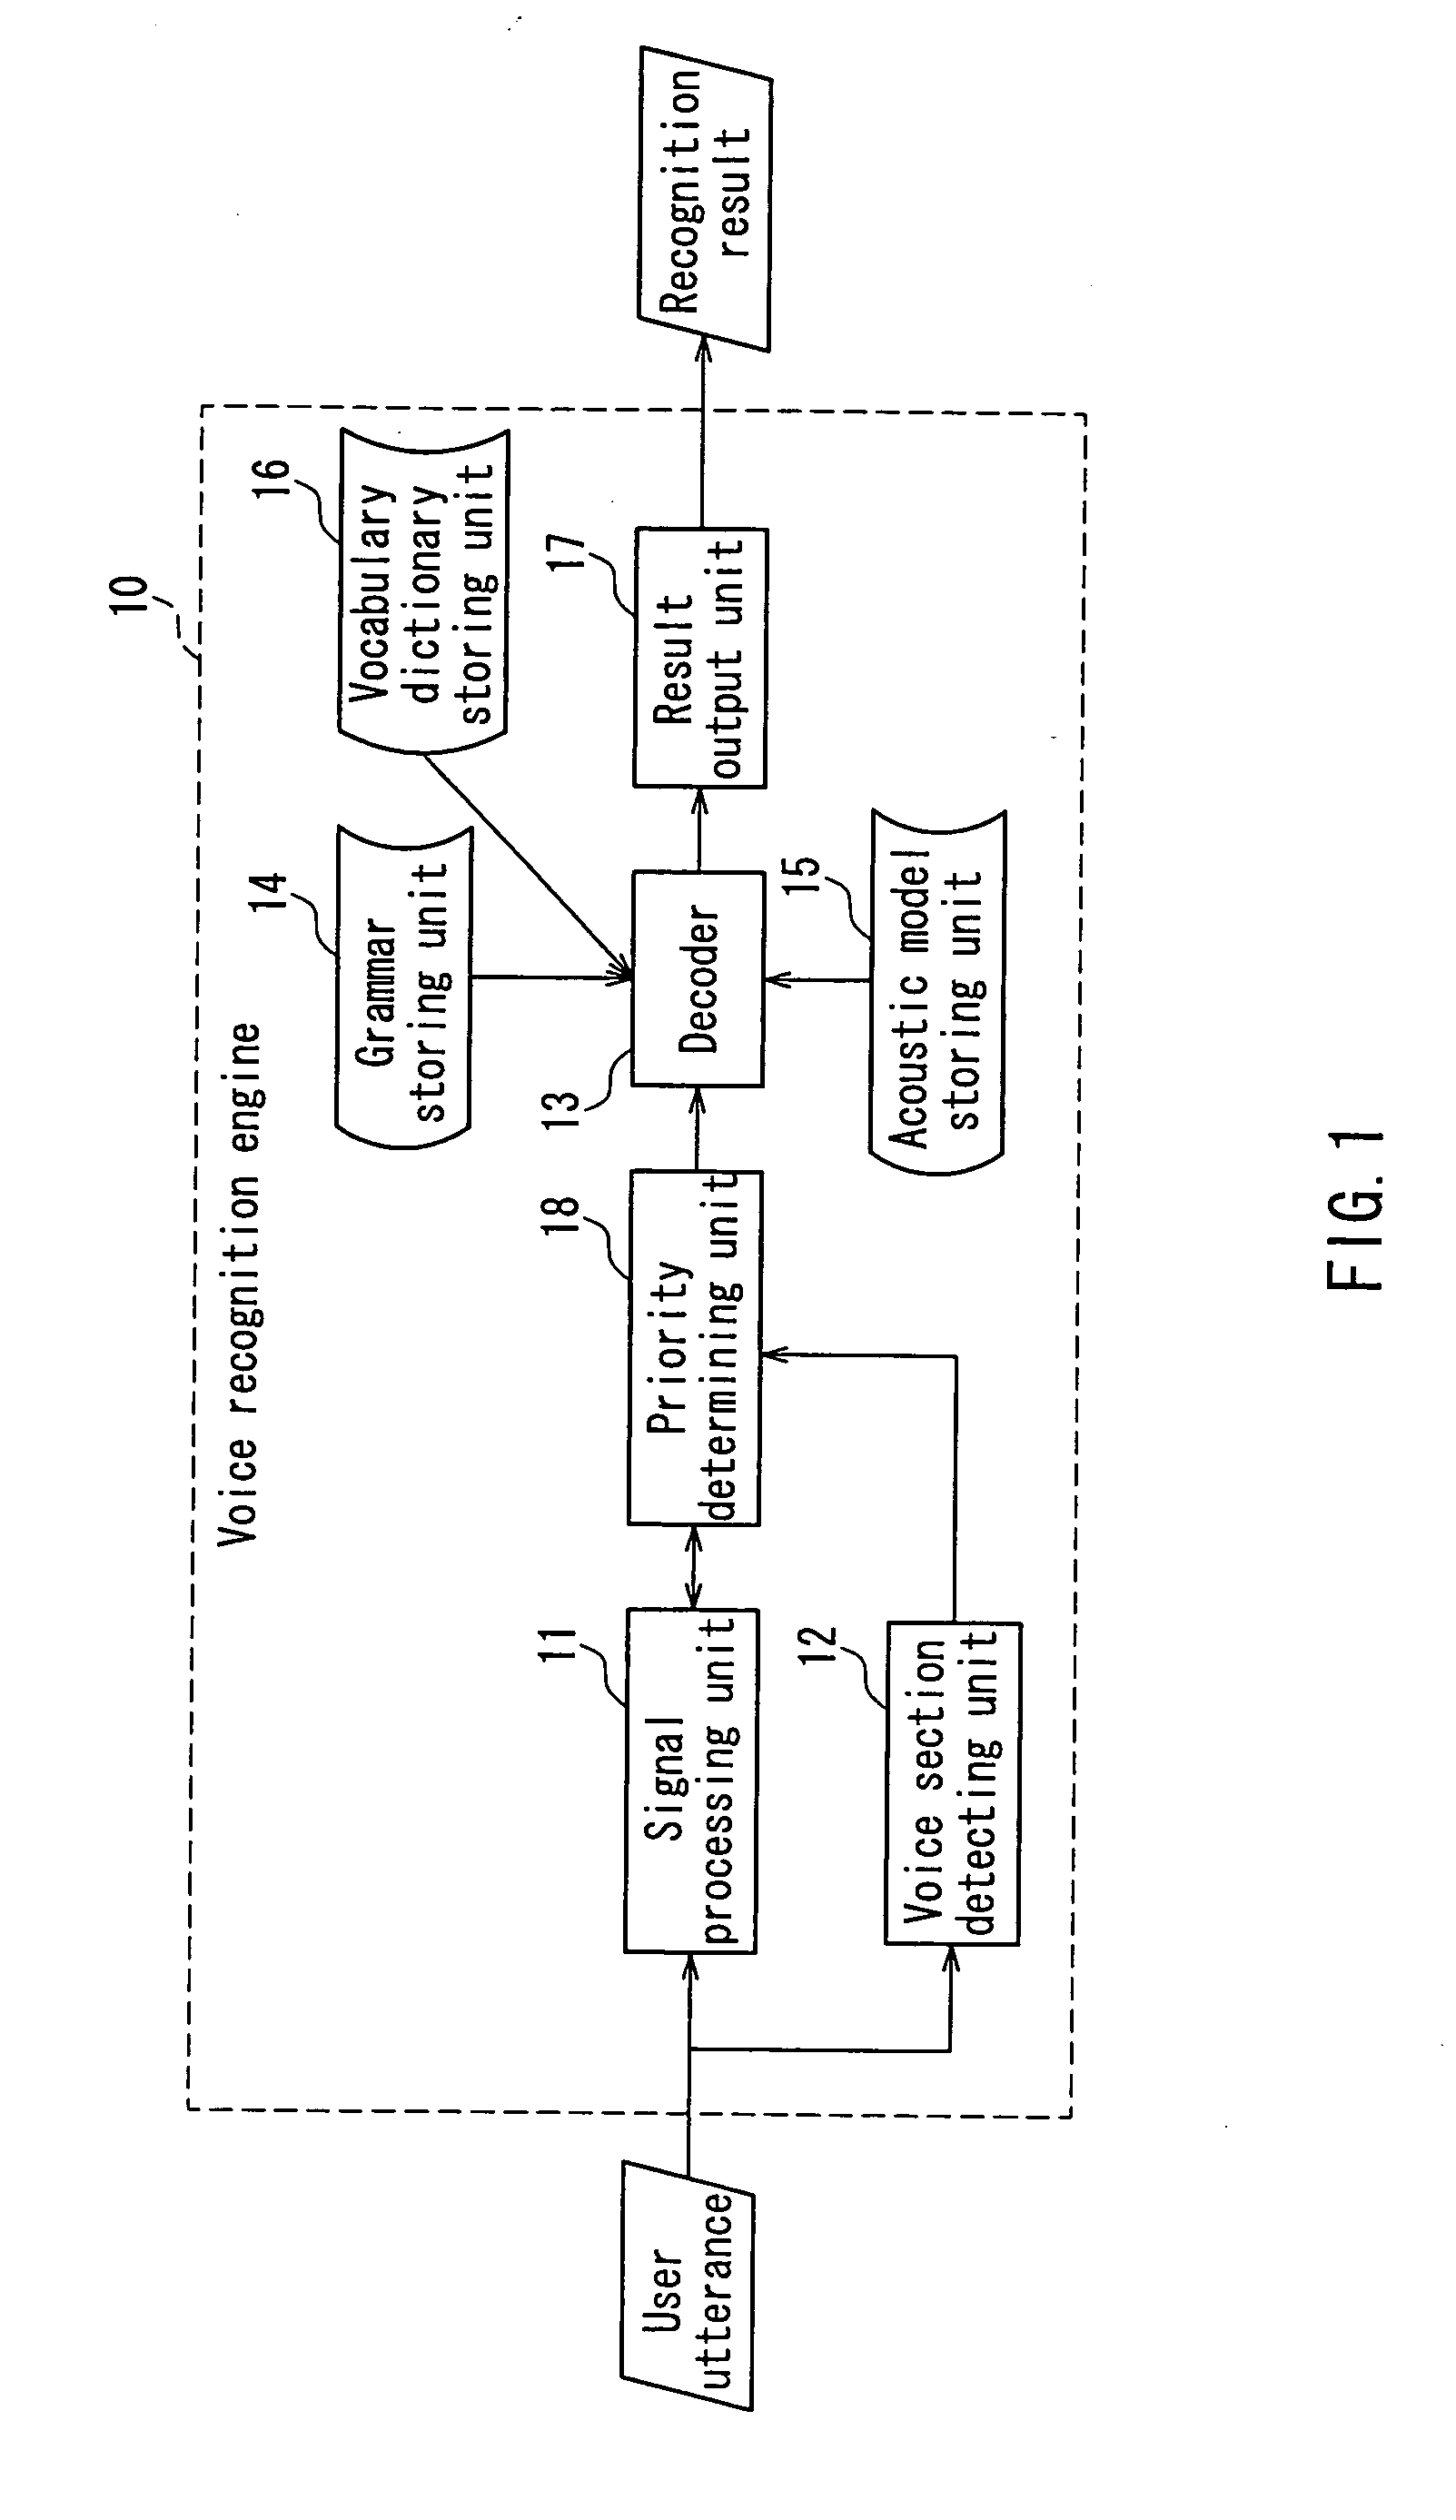 Voice recognition system and voice processing system